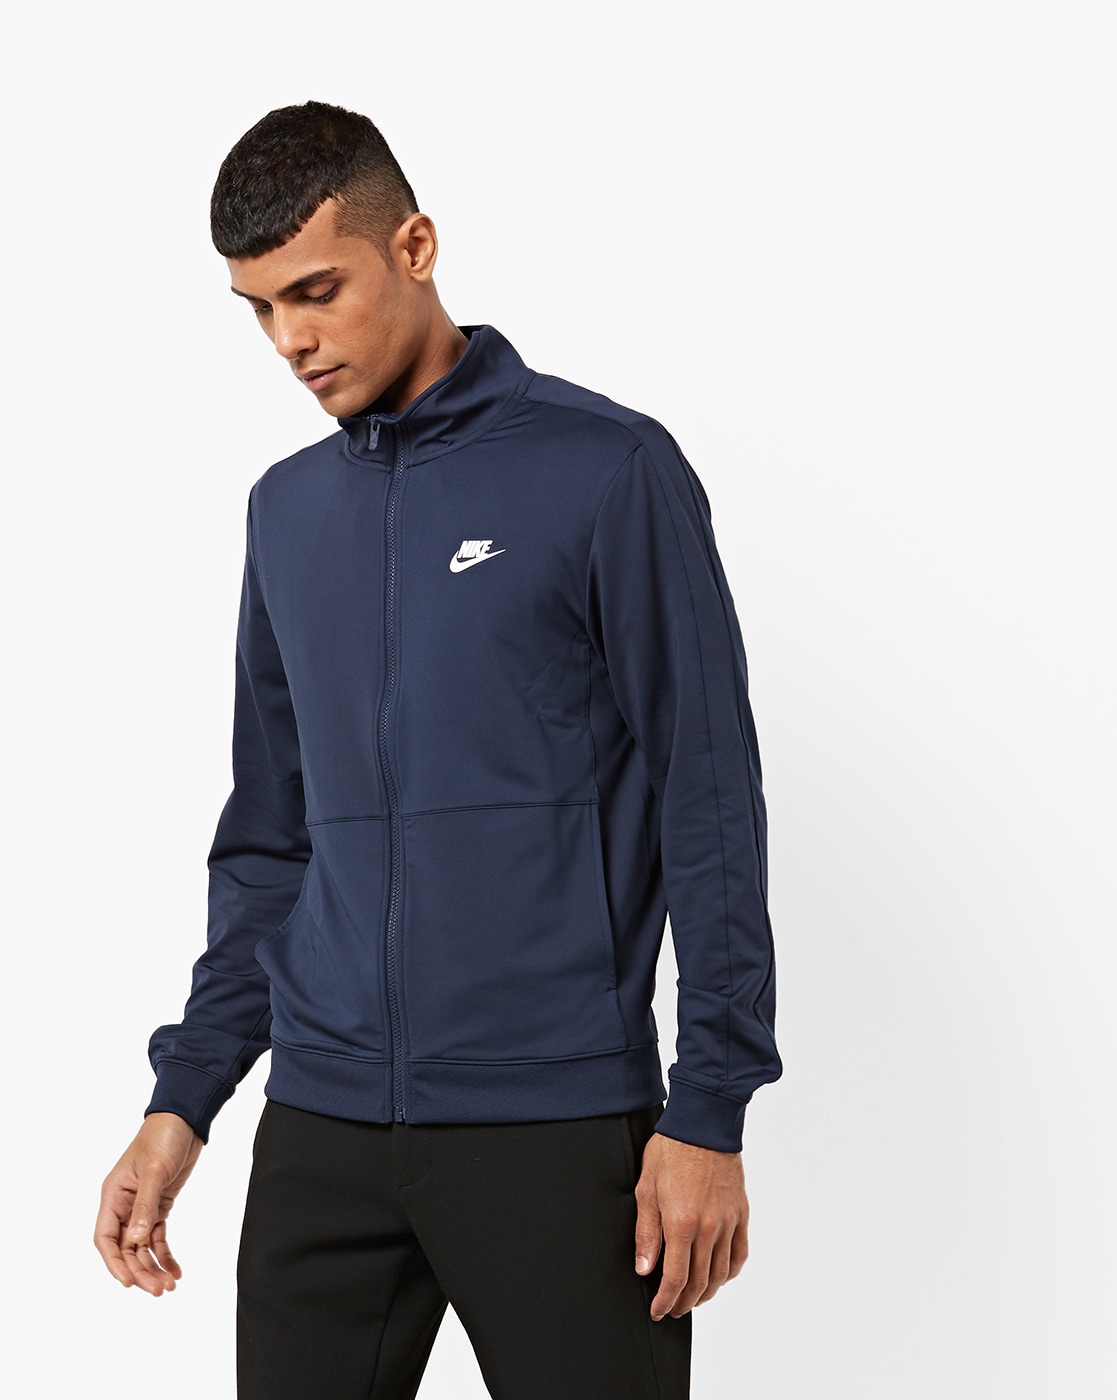 The 7 Best Nike Hooded Jackets for Men. Nike IN